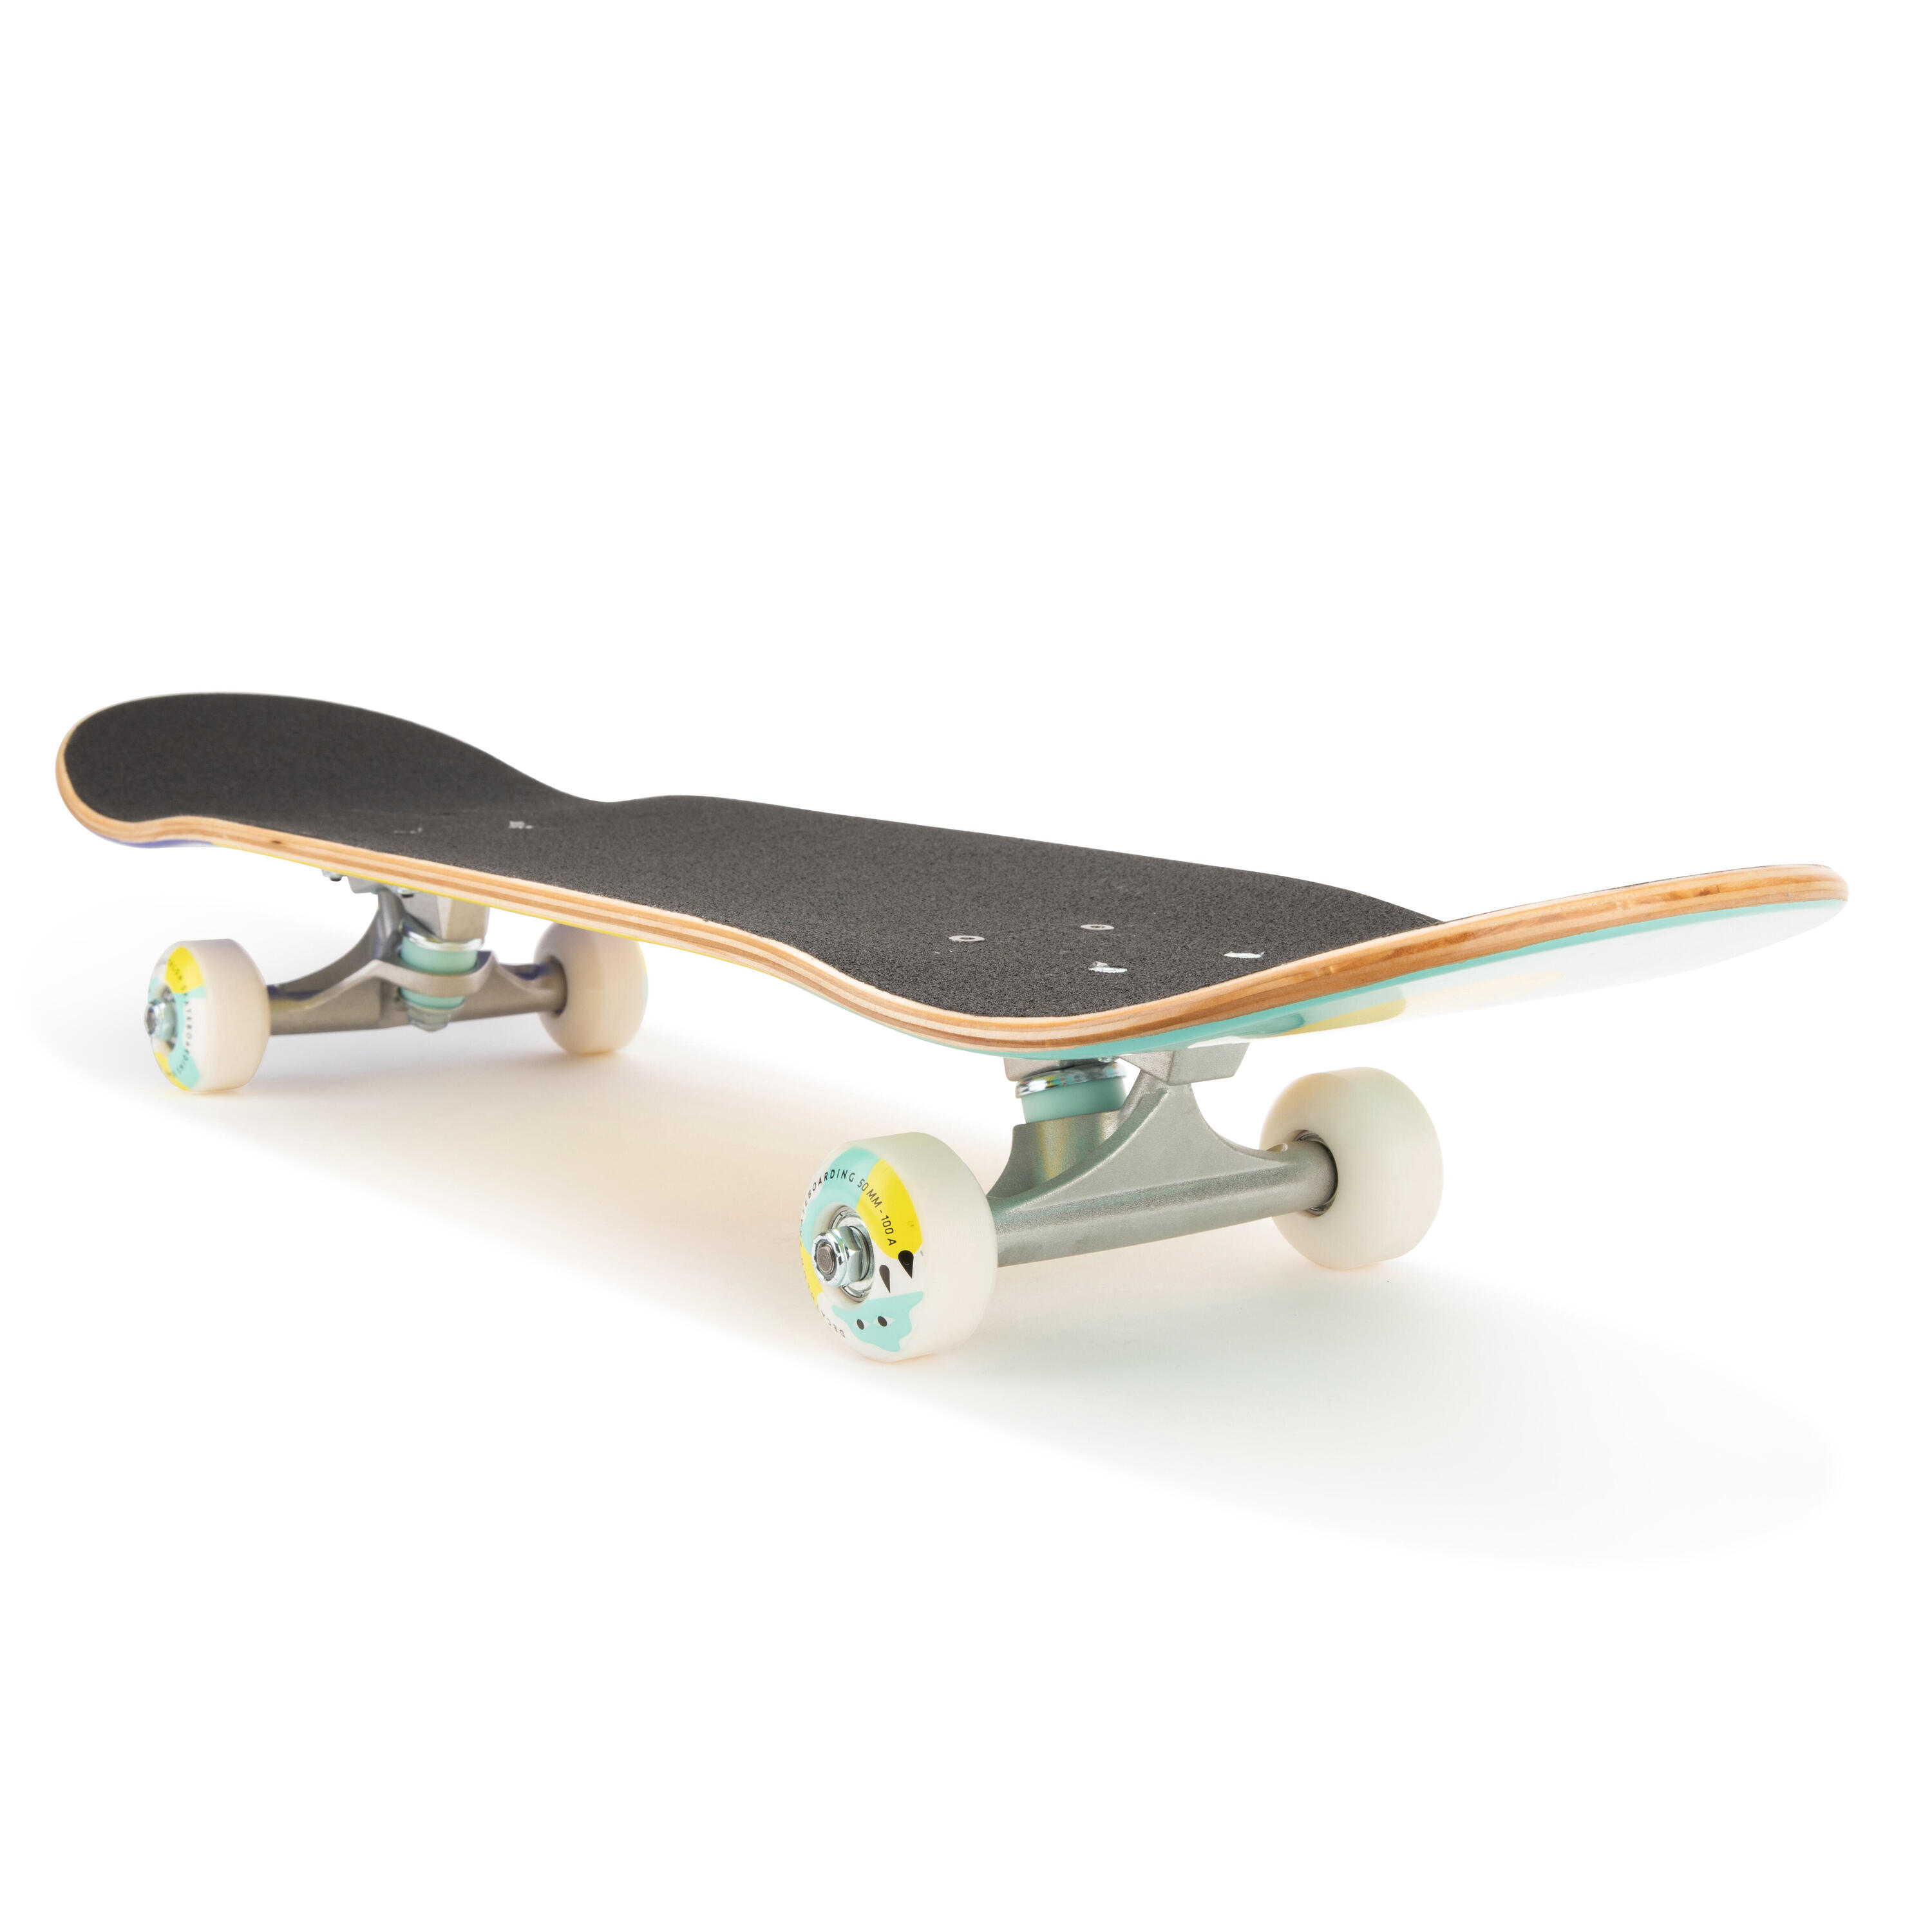 Kids' Ages 3 to 7 Years Mini Skateboard Size 7.25" CP100 - Rainbow 2/9